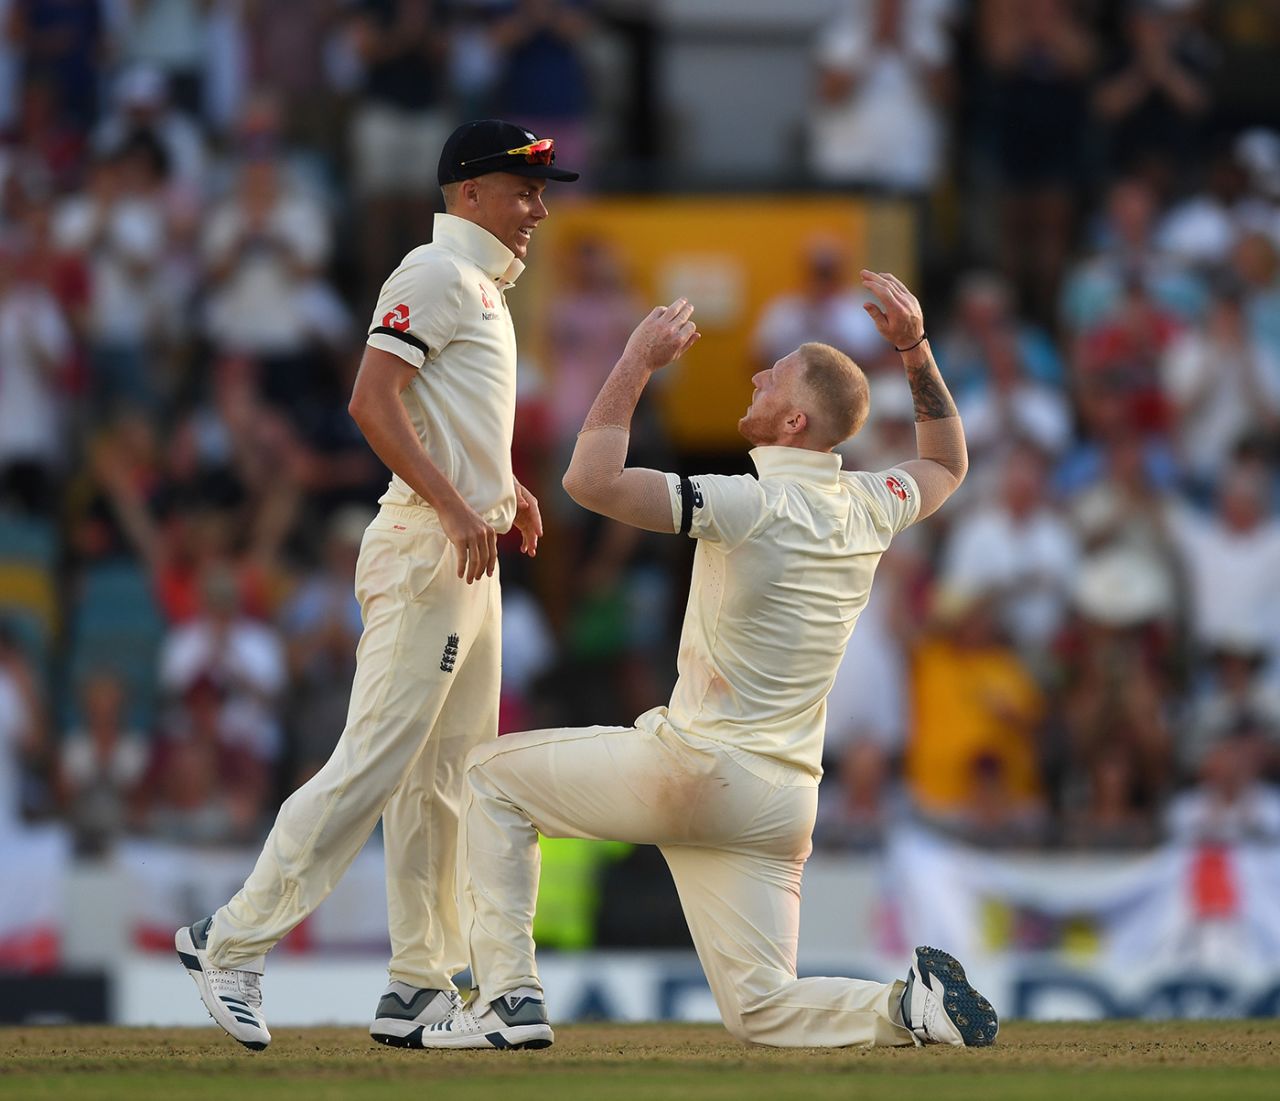 Sam Curran and Ben Stokes celebrate the wicket of Kemar Roach, West Indies v England, 1st Test, Barbados, 1st day, January 23, 2019